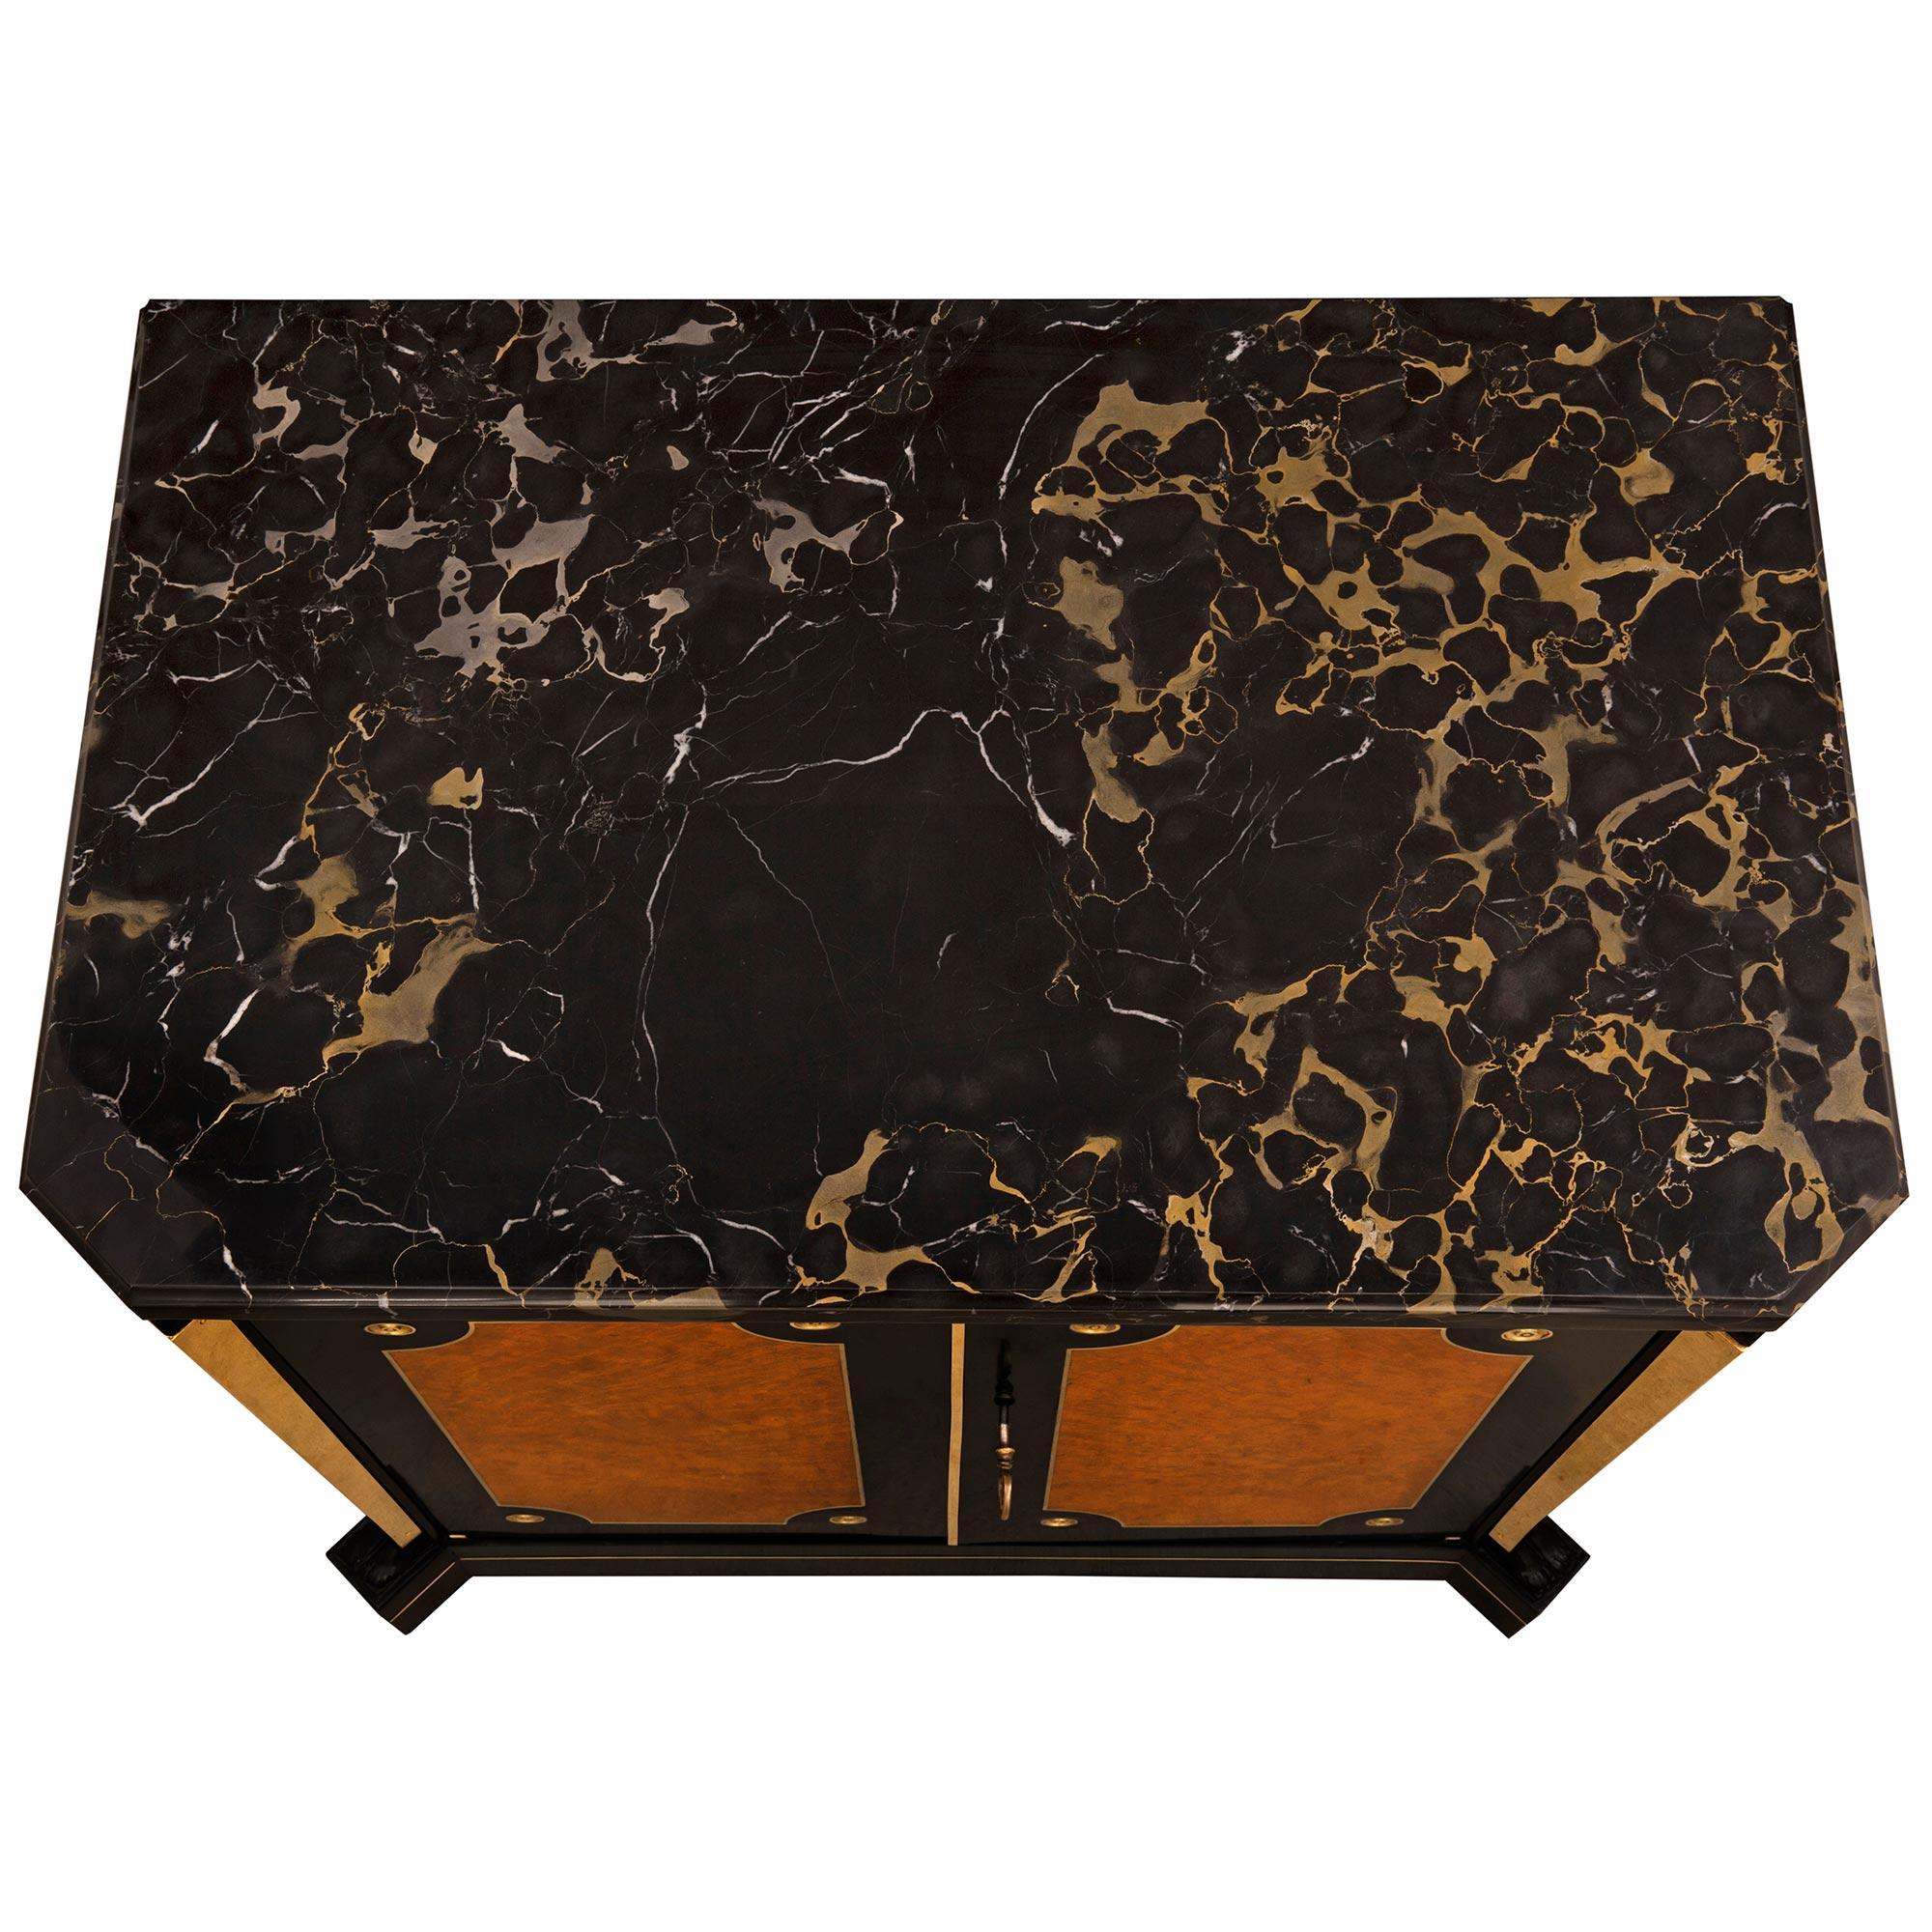 A handsome and most unique pair of Continental 19th century Neo-Classical st. ebony, ash wood, ormolu and Portoro marble cabinets. Each cabinet is raised by a straight base with elegant cut corners. Leading up each side are impressive decorative